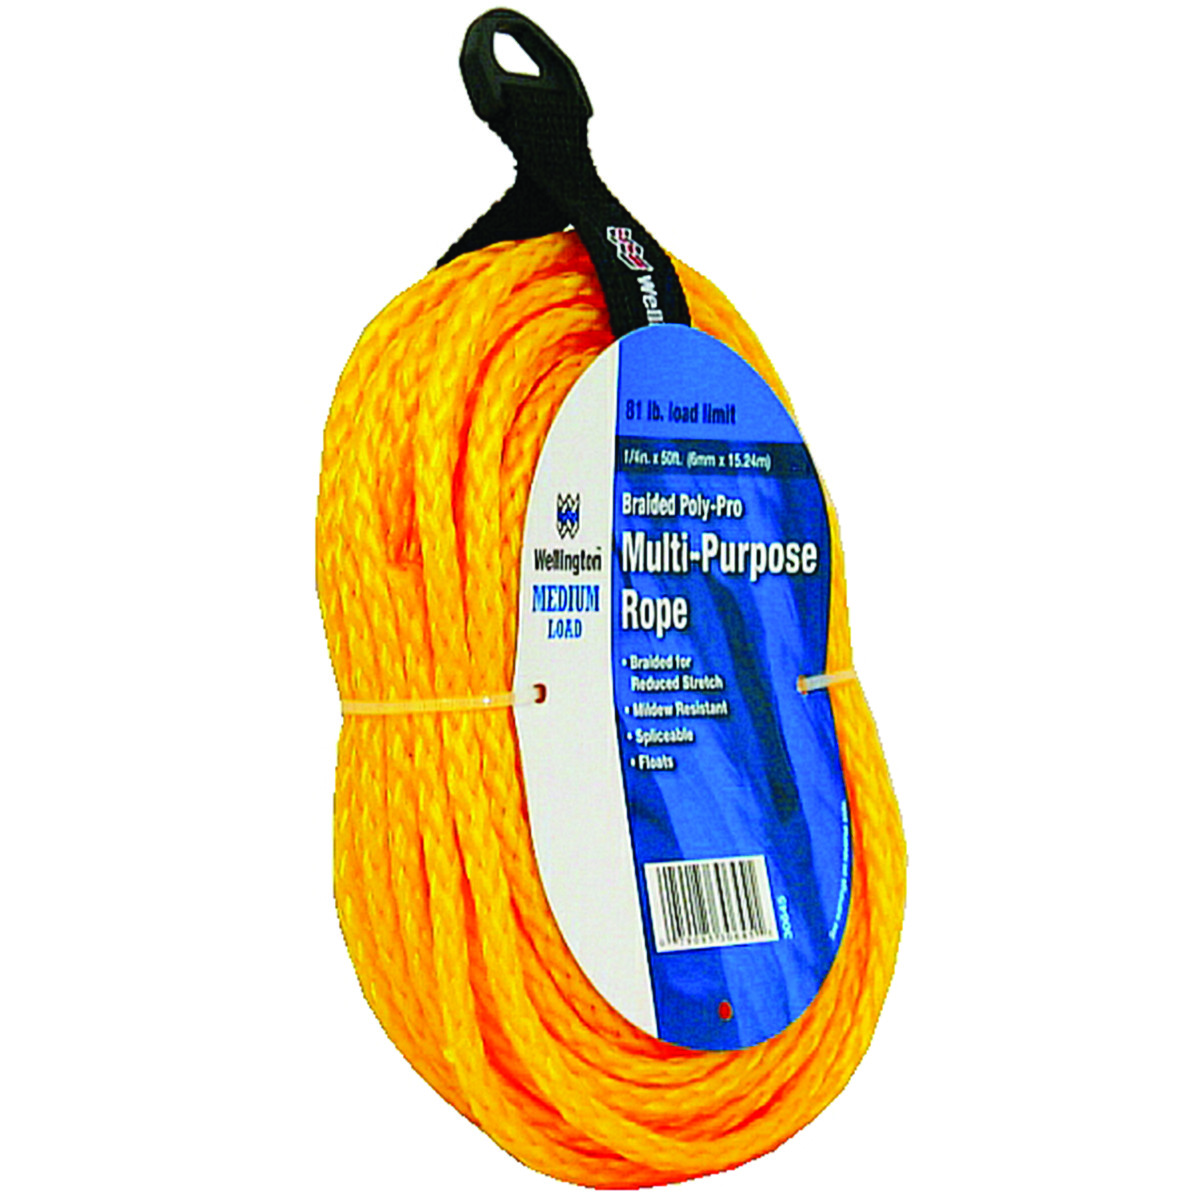 Wellington 30645 Rope, 81 lb Working Load Limit, 50 ft L, 1/4 in Dia,